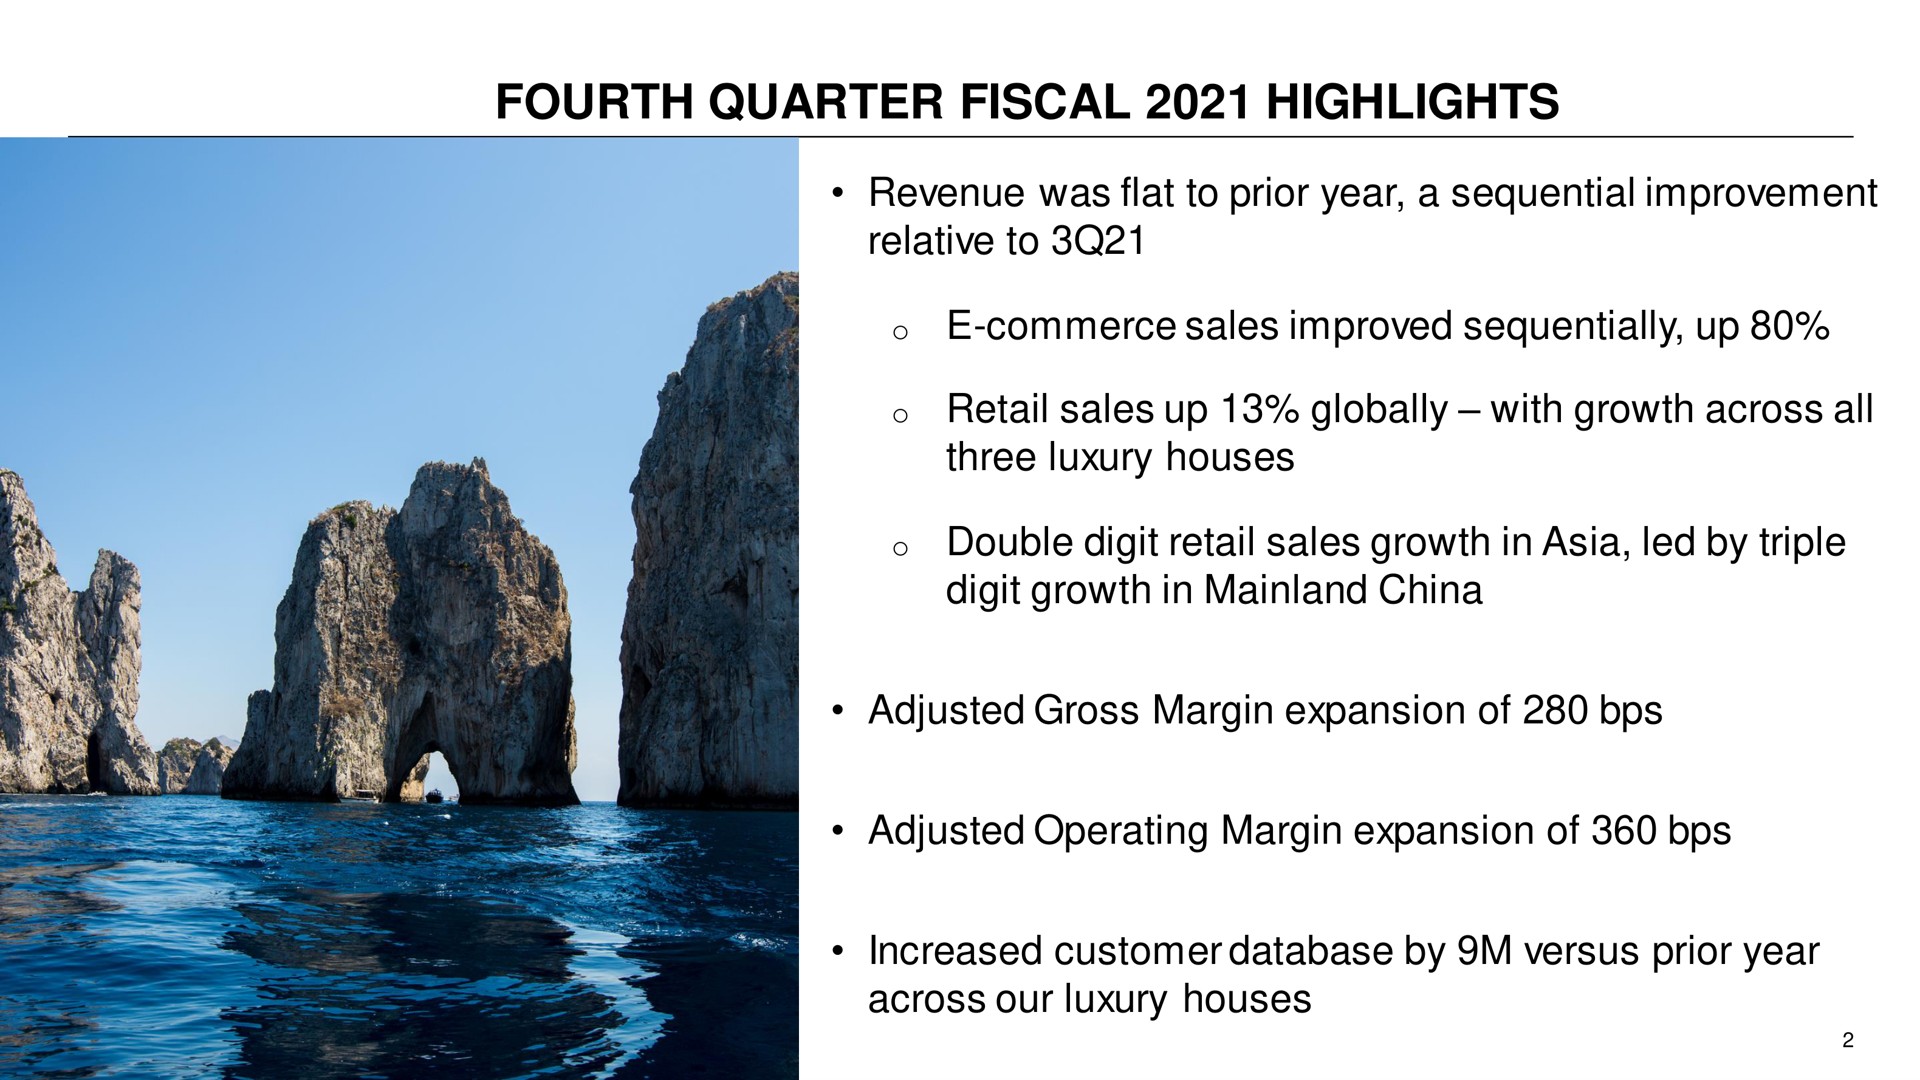 fourth quarter fiscal highlights revenue was flat to prior year a sequential improvement relative to commerce sales improved sequentially up retail sales up globally with growth across all three luxury houses double digit retail sales growth in led by triple digit growth in china adjusted gross margin expansion of adjusted operating margin expansion of increased customer by versus prior year across our luxury houses | Capri Holdings